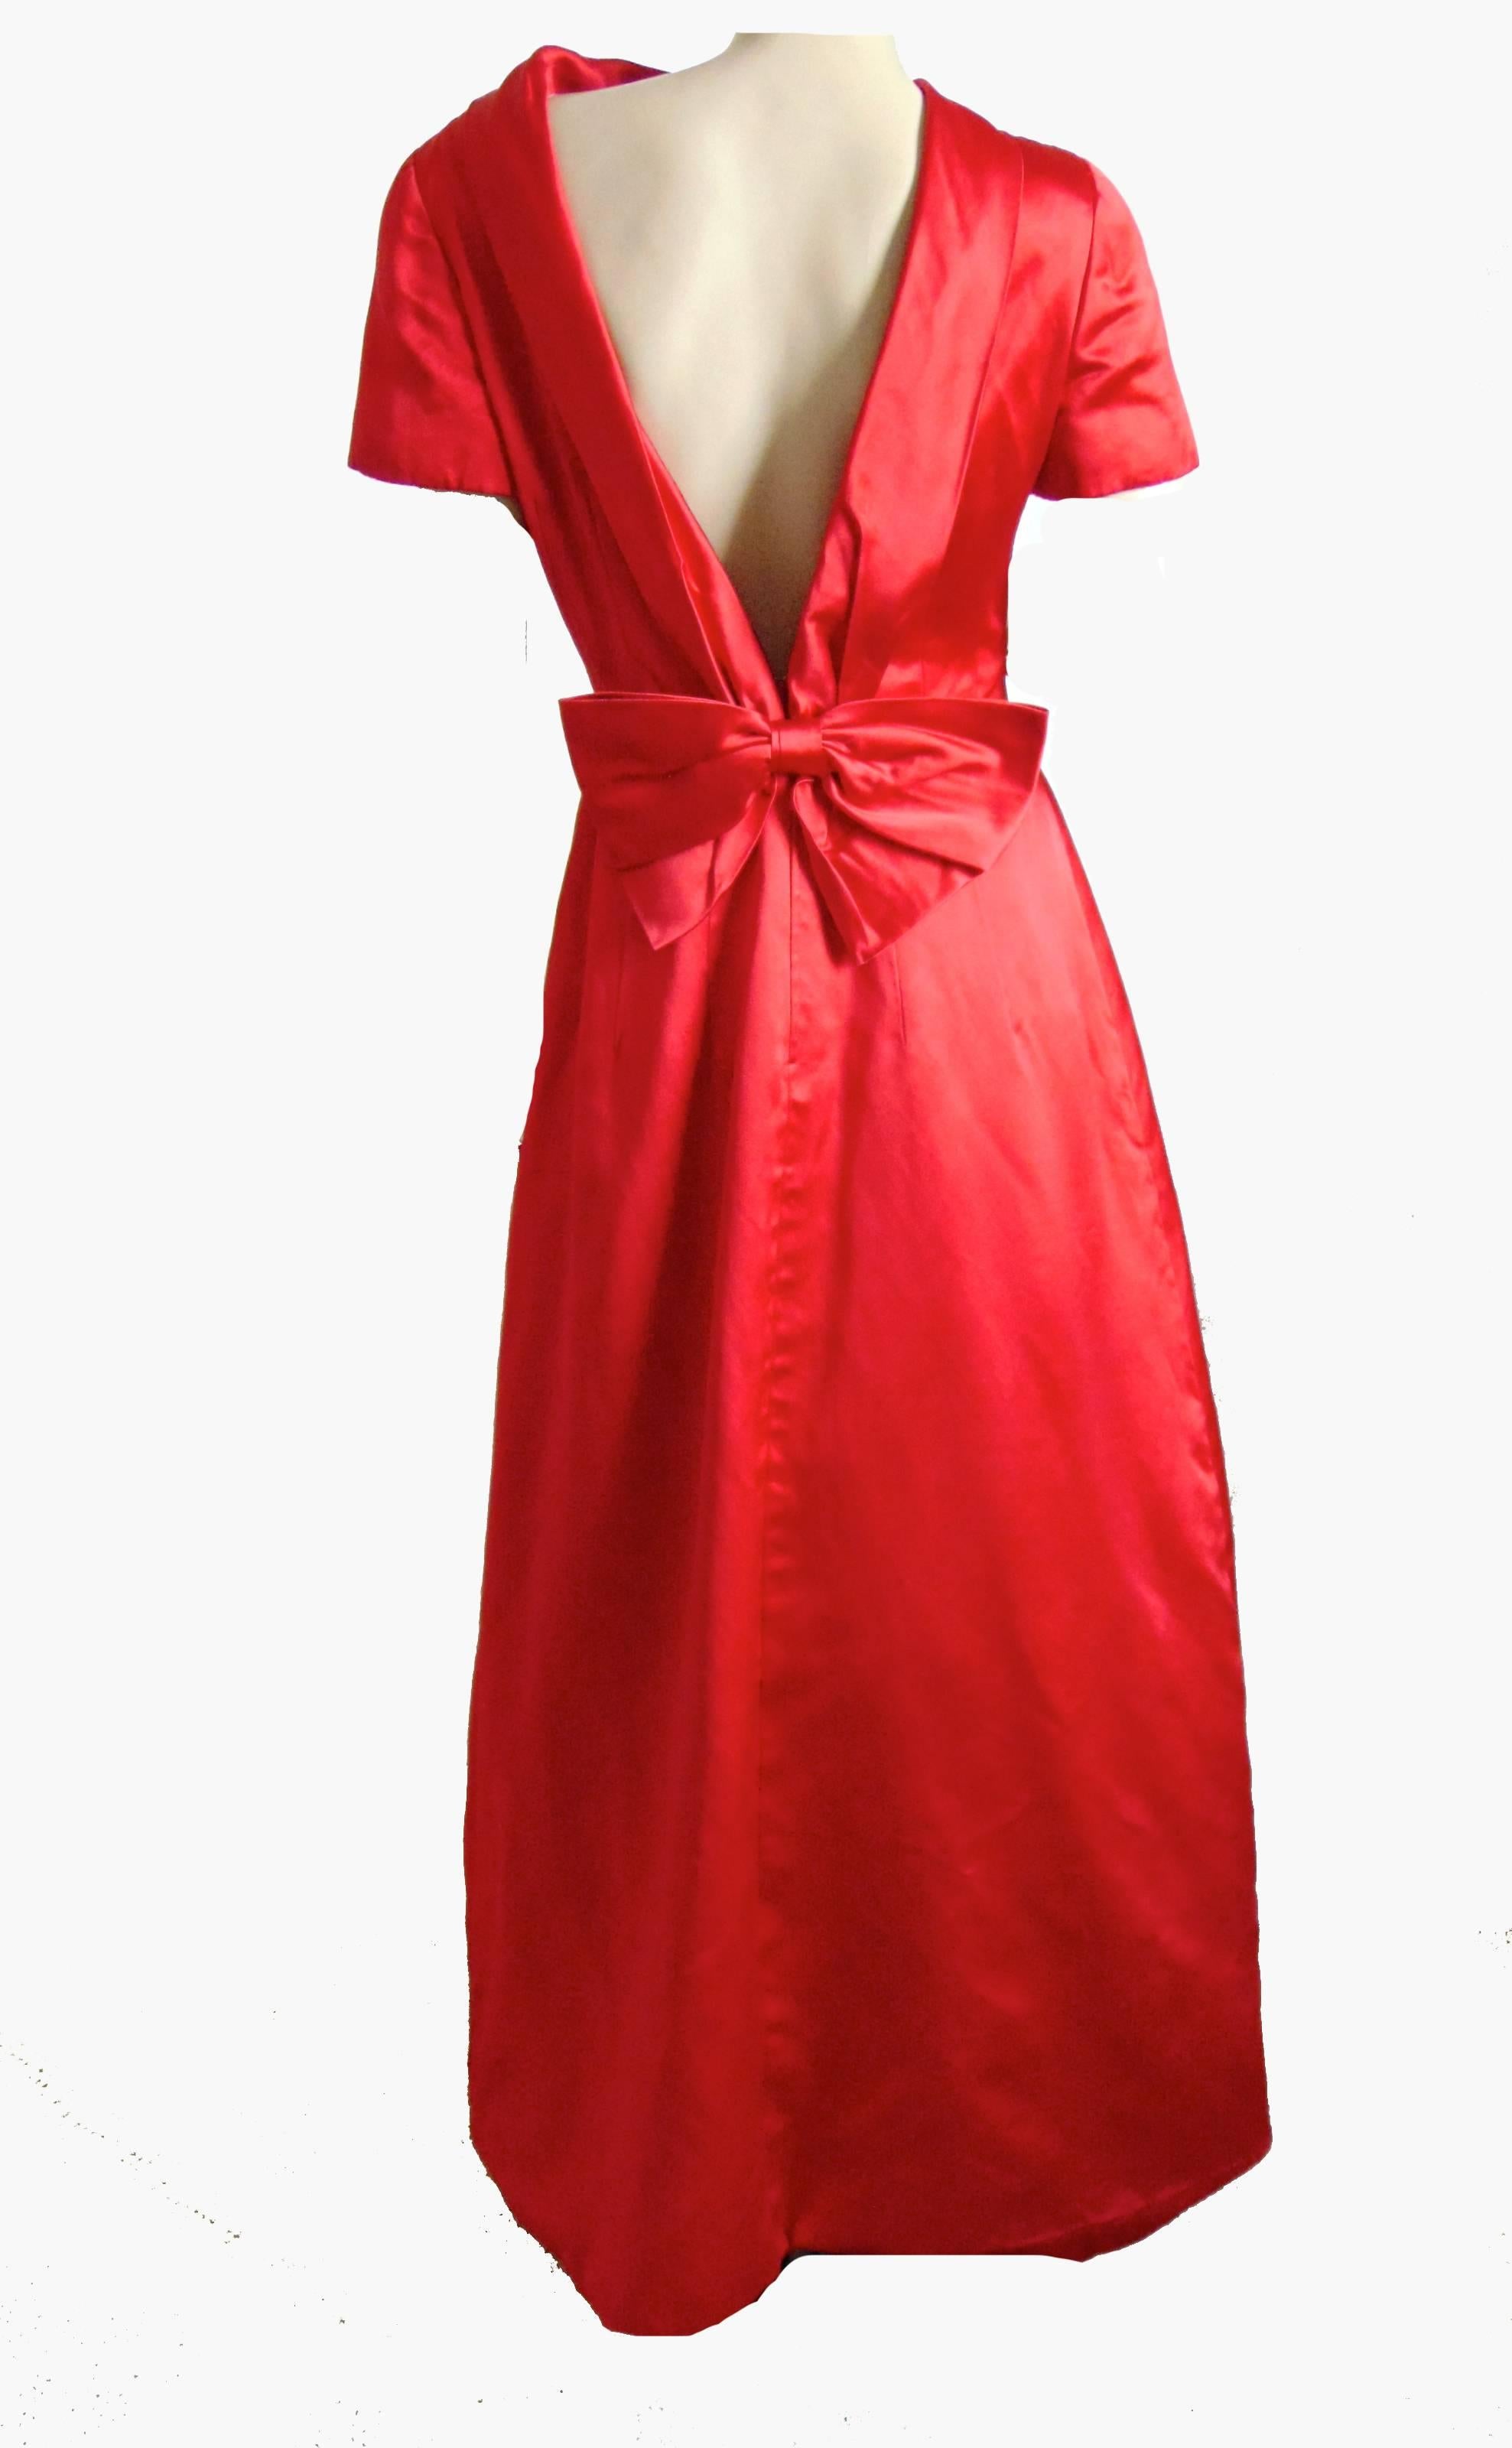 This brilliant gown was designed by Valentino in the 1990s.  Made from a vibrant red silk satin fabric, it features a collared neckline and low cut back with bow detail.  Fully-lined and in excellent condition, we note some small thin pulls to the